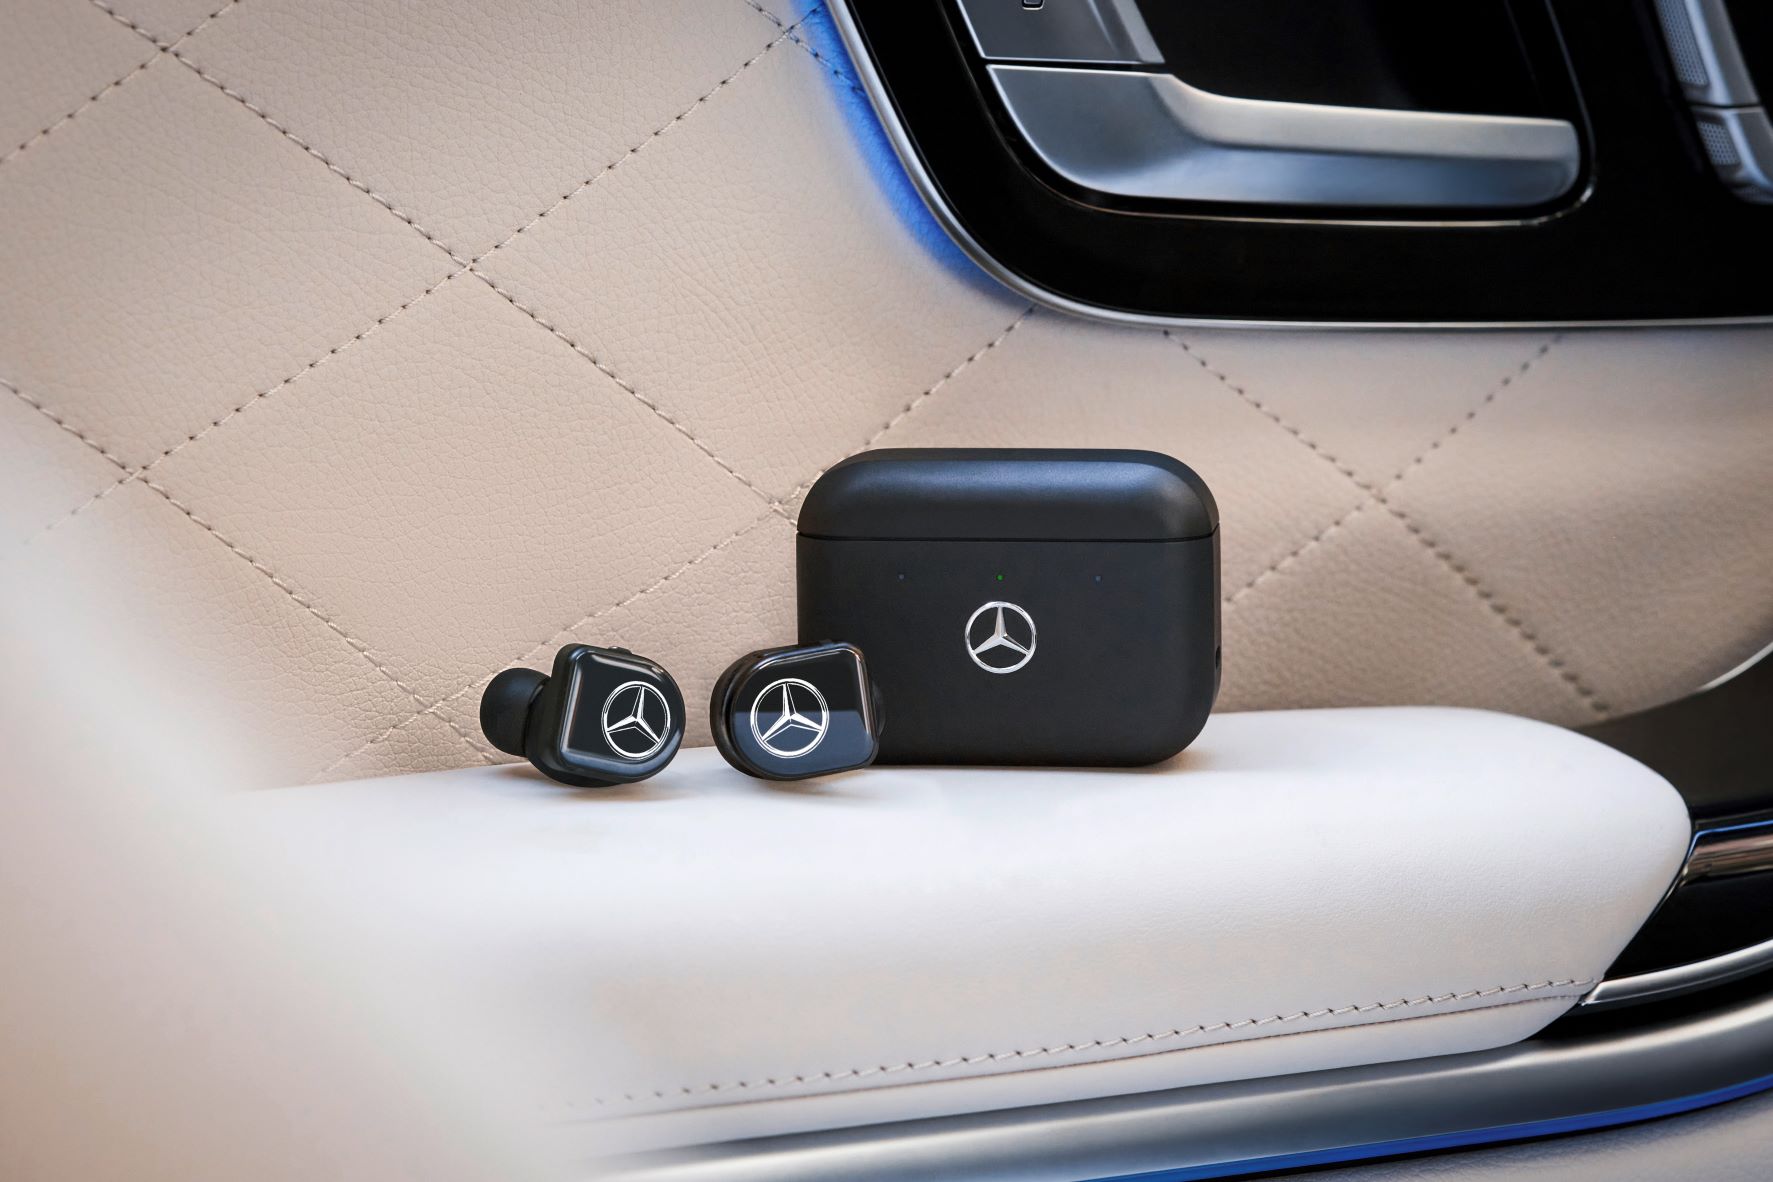 Mercedes-Benz and Master & Dynamic earphones